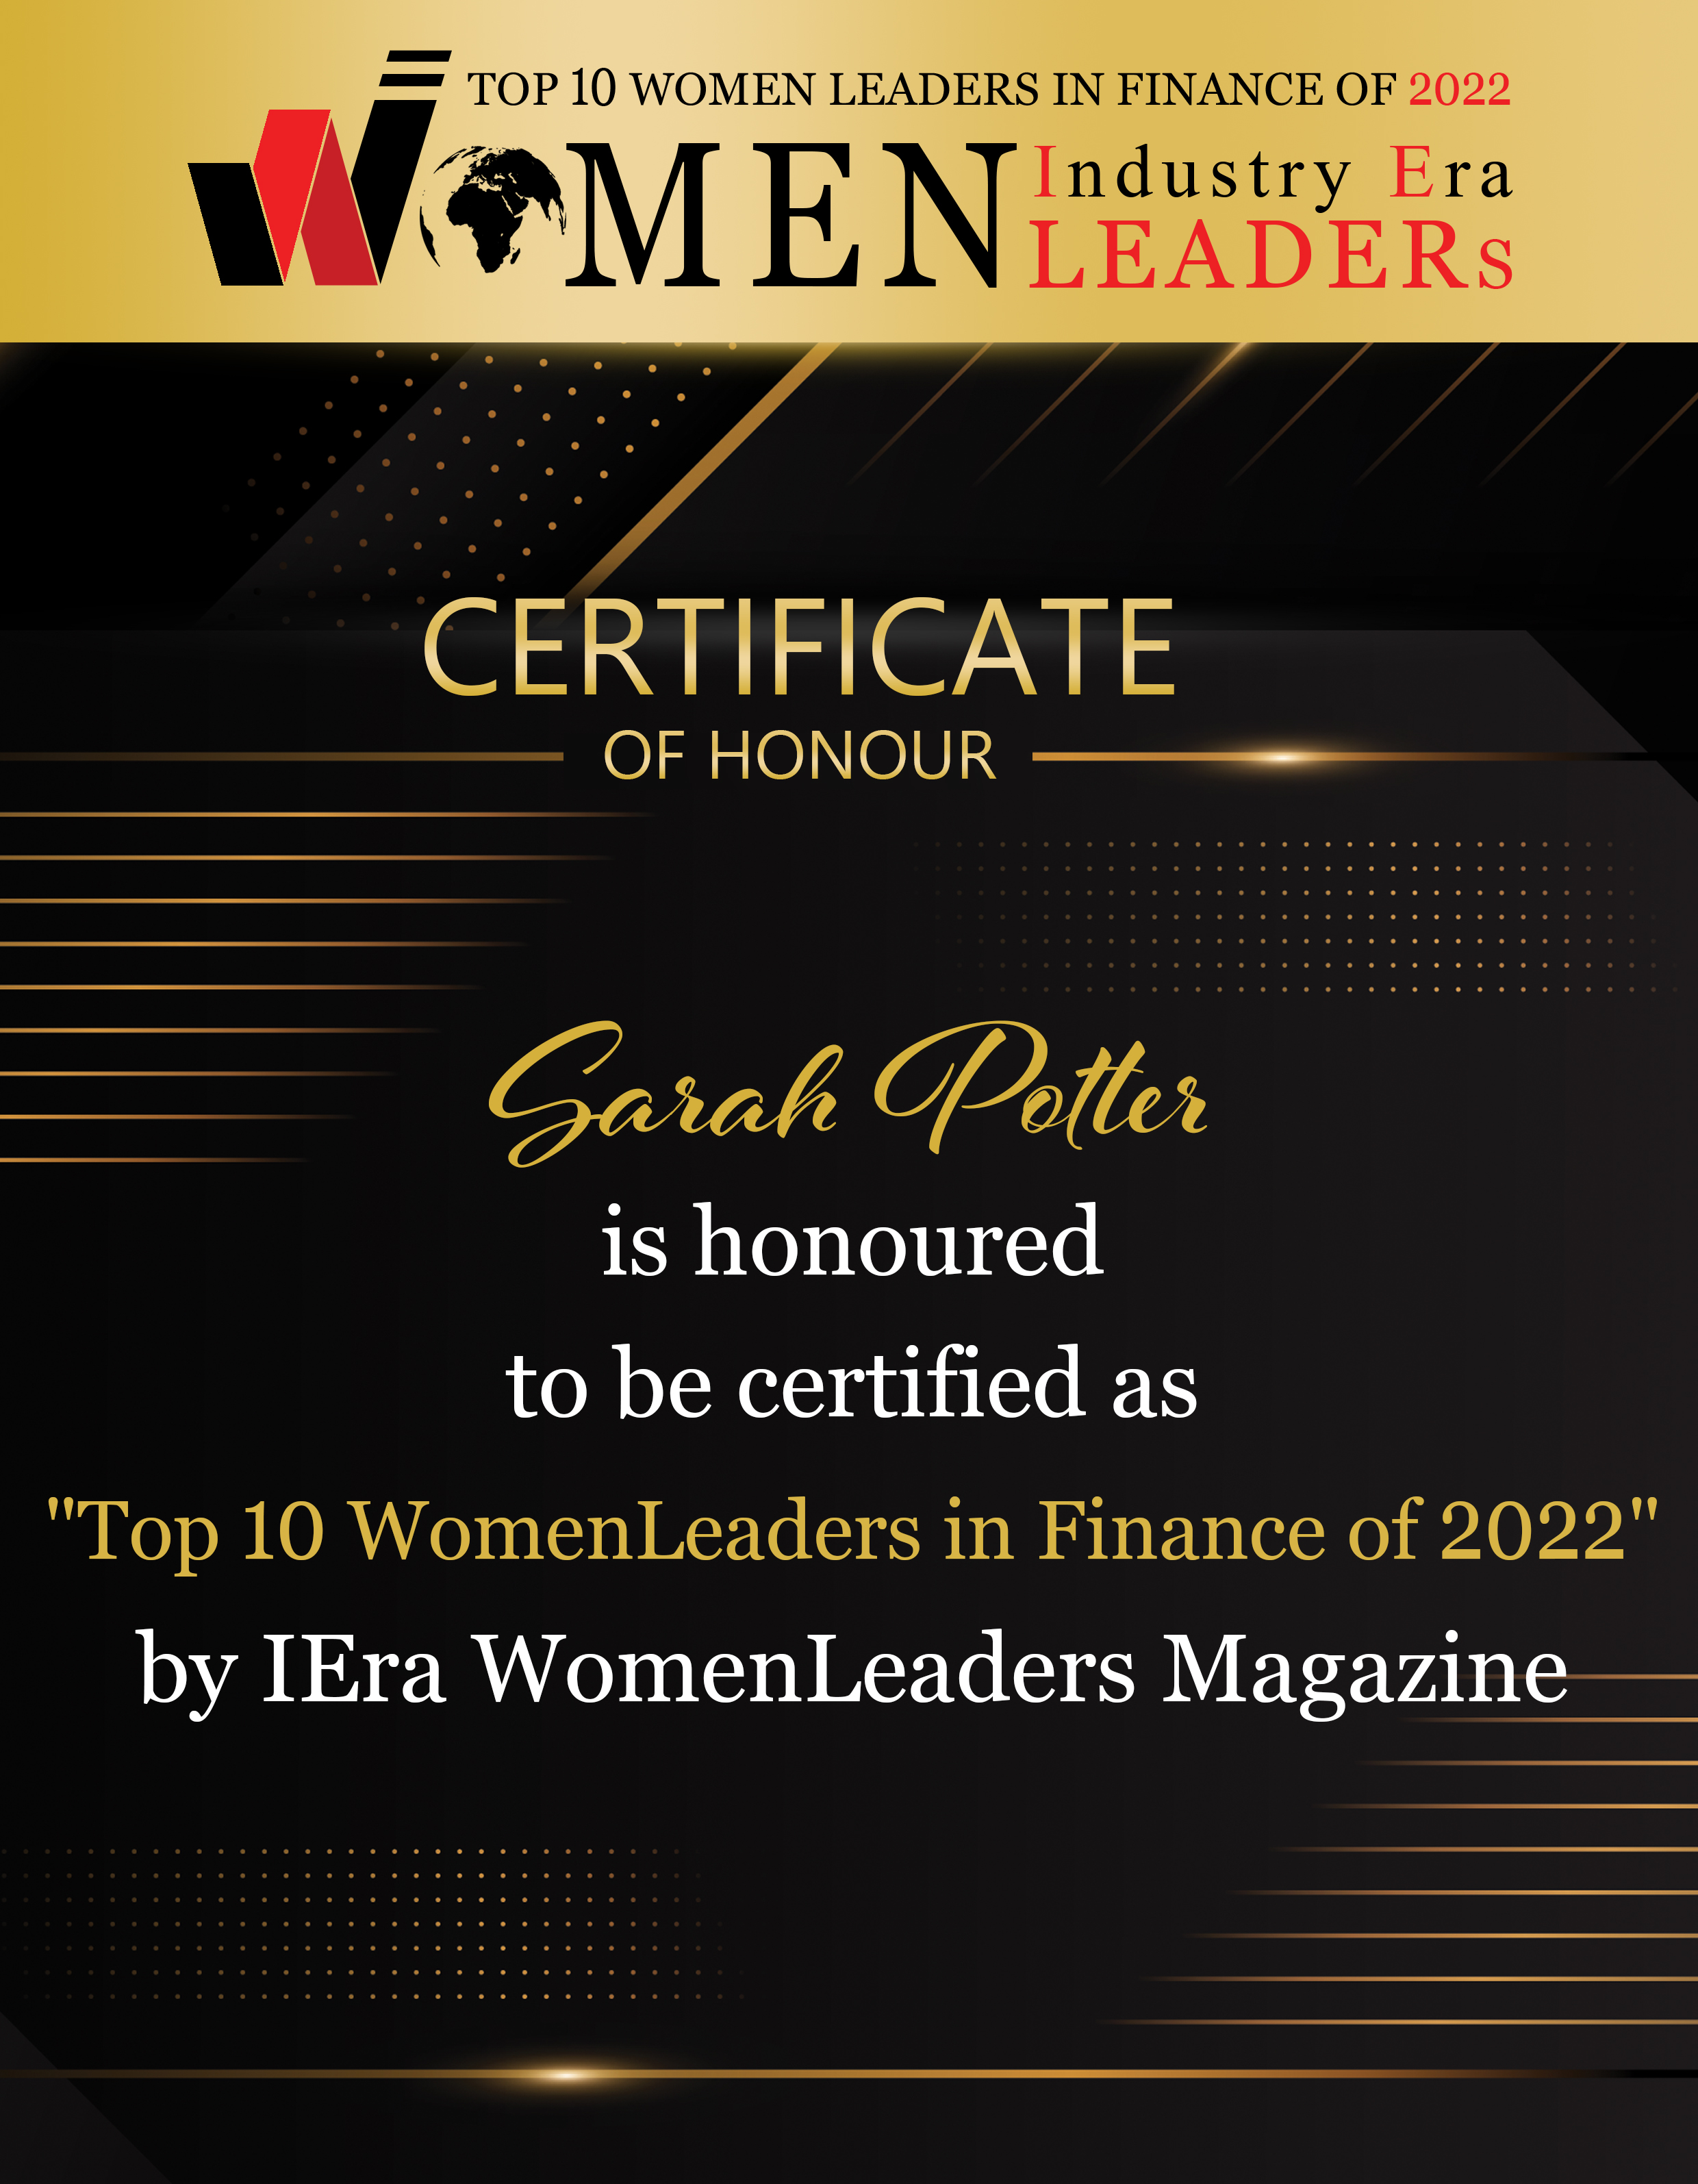 Sarah Potter, Chief Education Officer at TradeStation, Top 10 Women Leaders in Finance of 2022